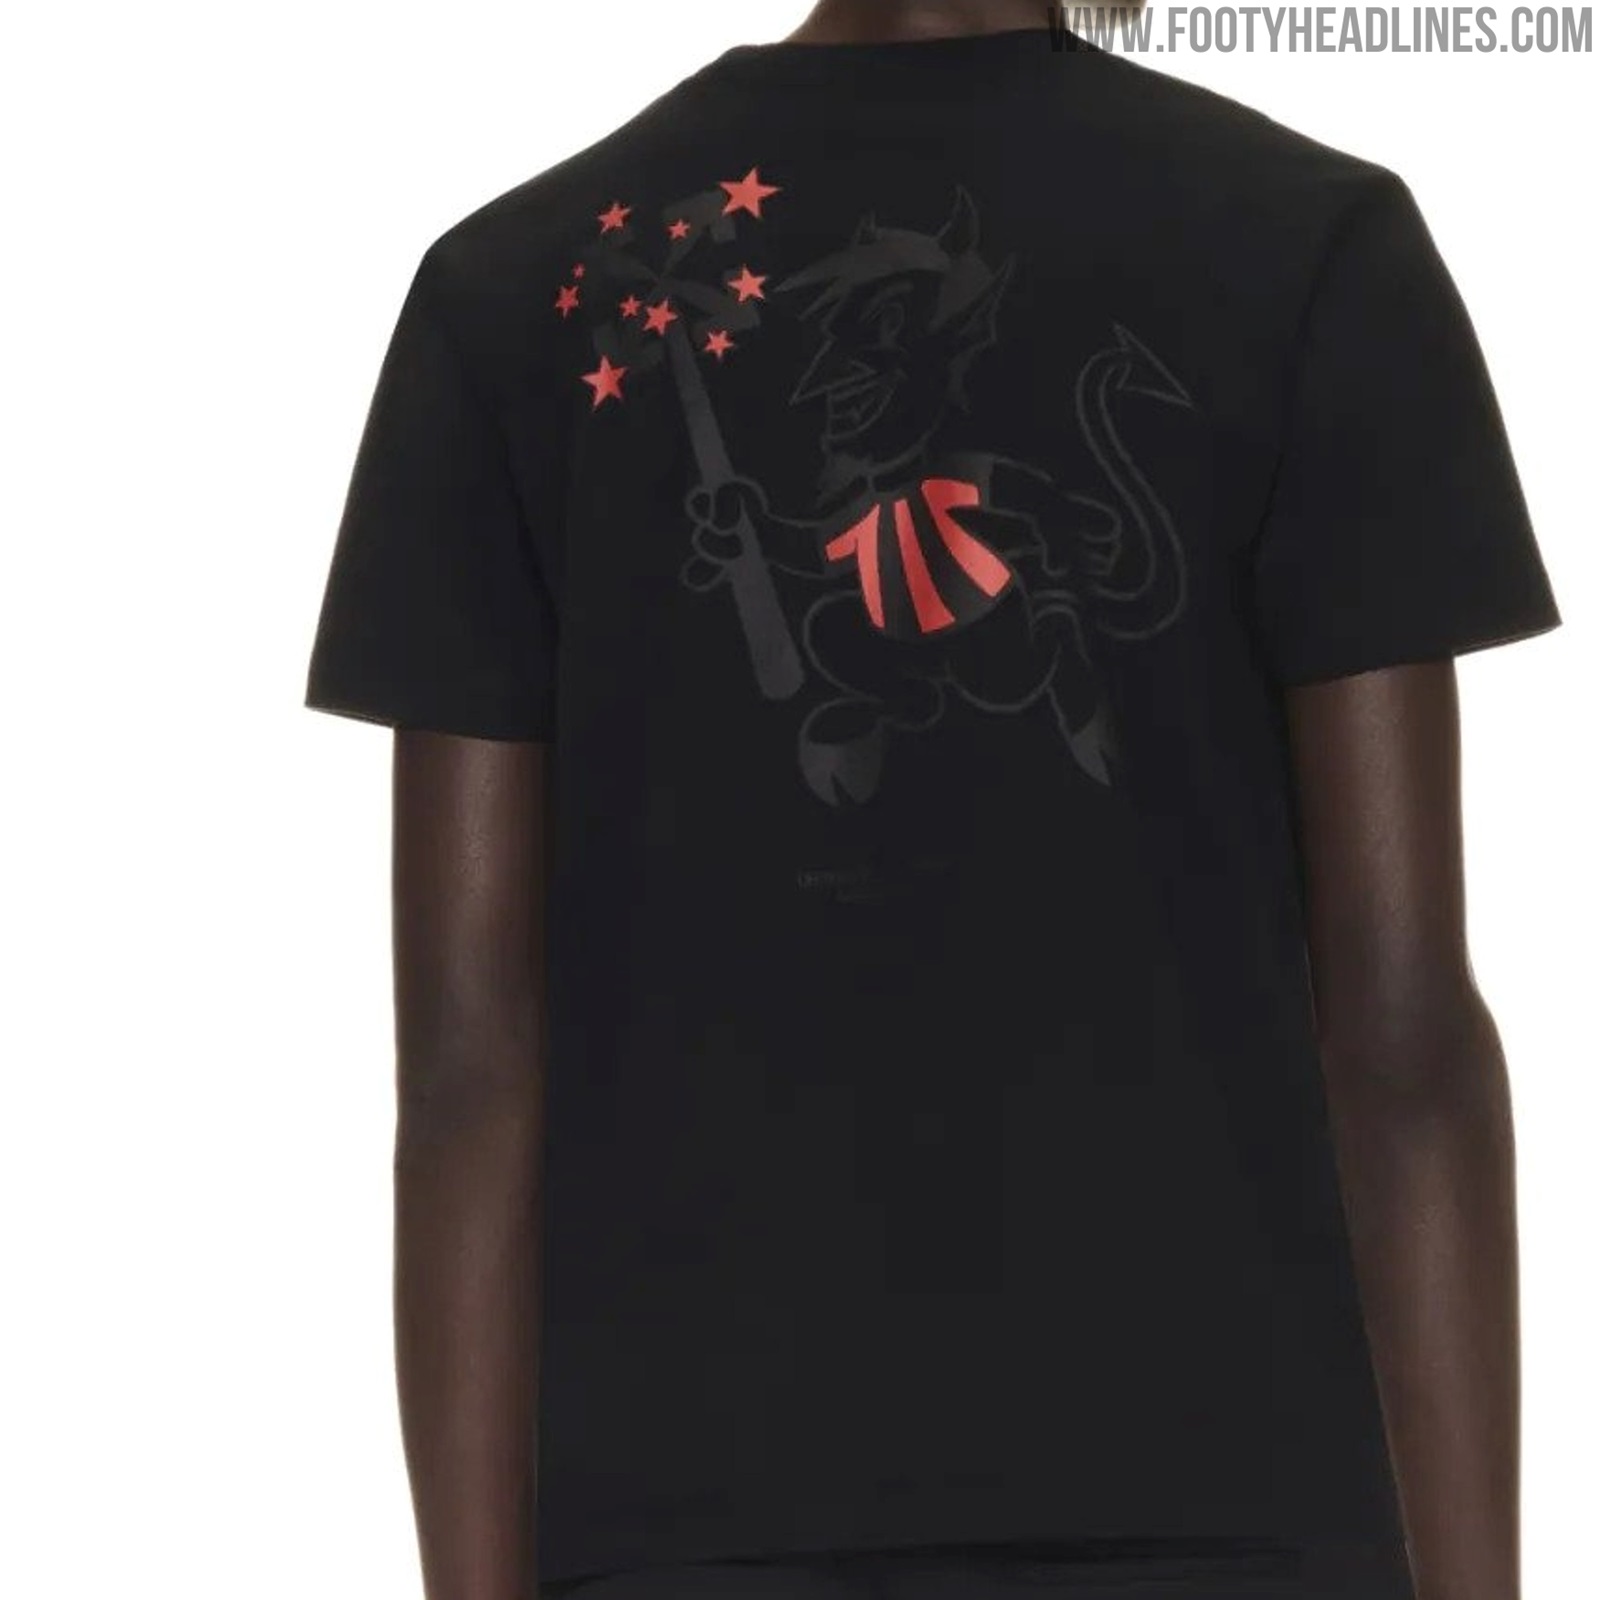 AC Milan and Off-White Drop a Limited-Edition T-Shirt to Support